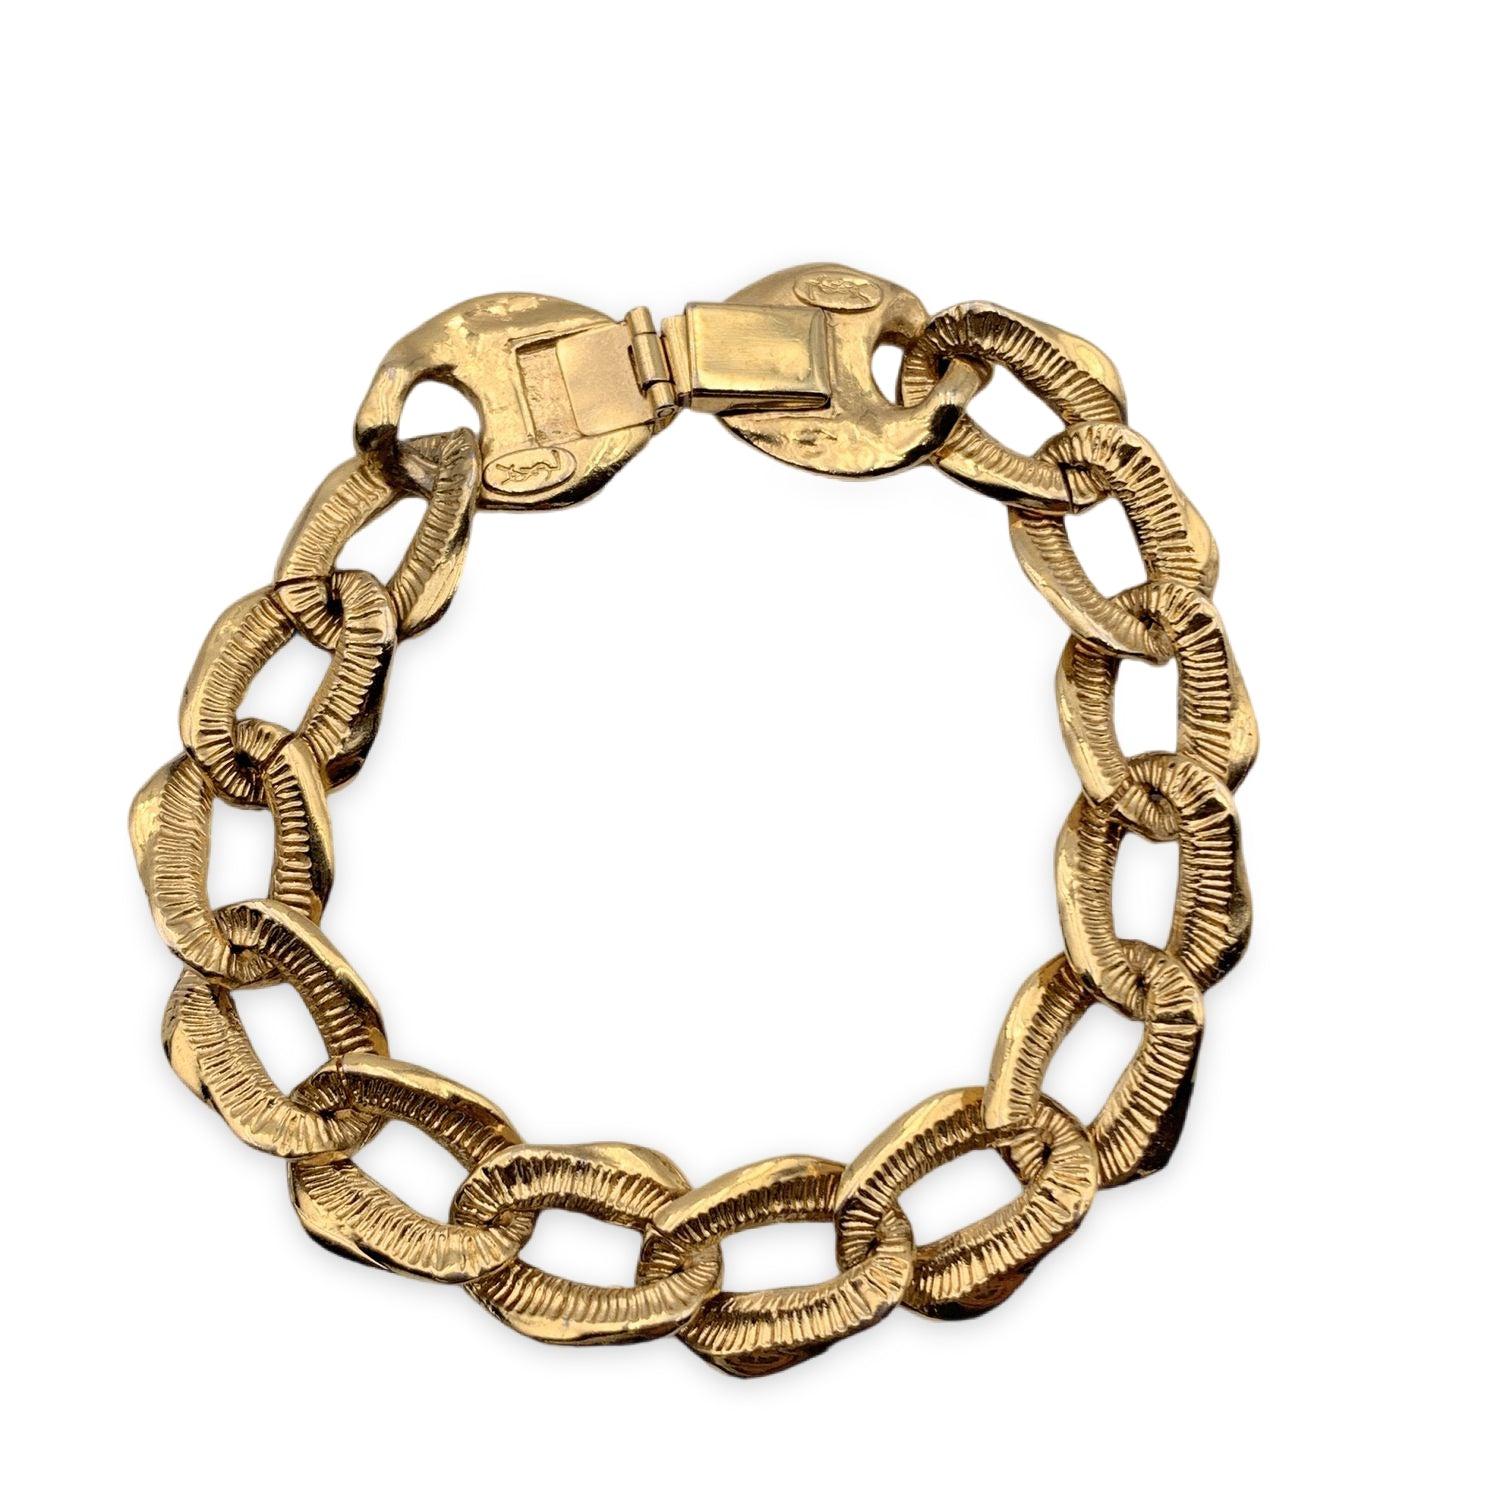 Vintage Yves Saint Laurent gold metal chain link bracelet. Box closure. Max chain length: about 7 inches - 17.8 cm. Retail price is 580 Dollars Condition A - EXCELLENT Gently used. Please, look carefully at the photos and ask for any detail. Details